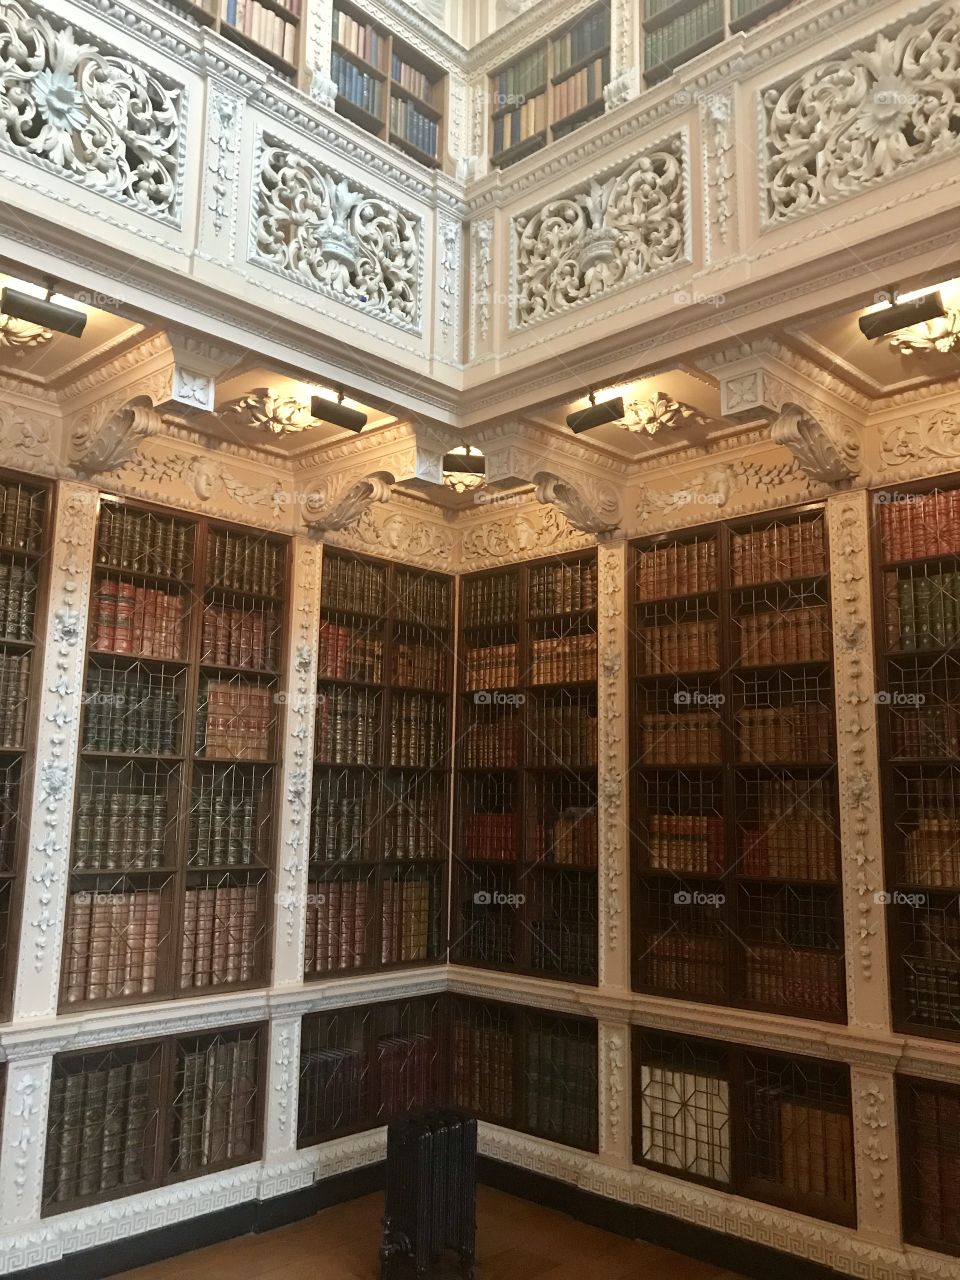 Library at Blenheim palace, uk. Blenheim is Churchill’s birthplace 